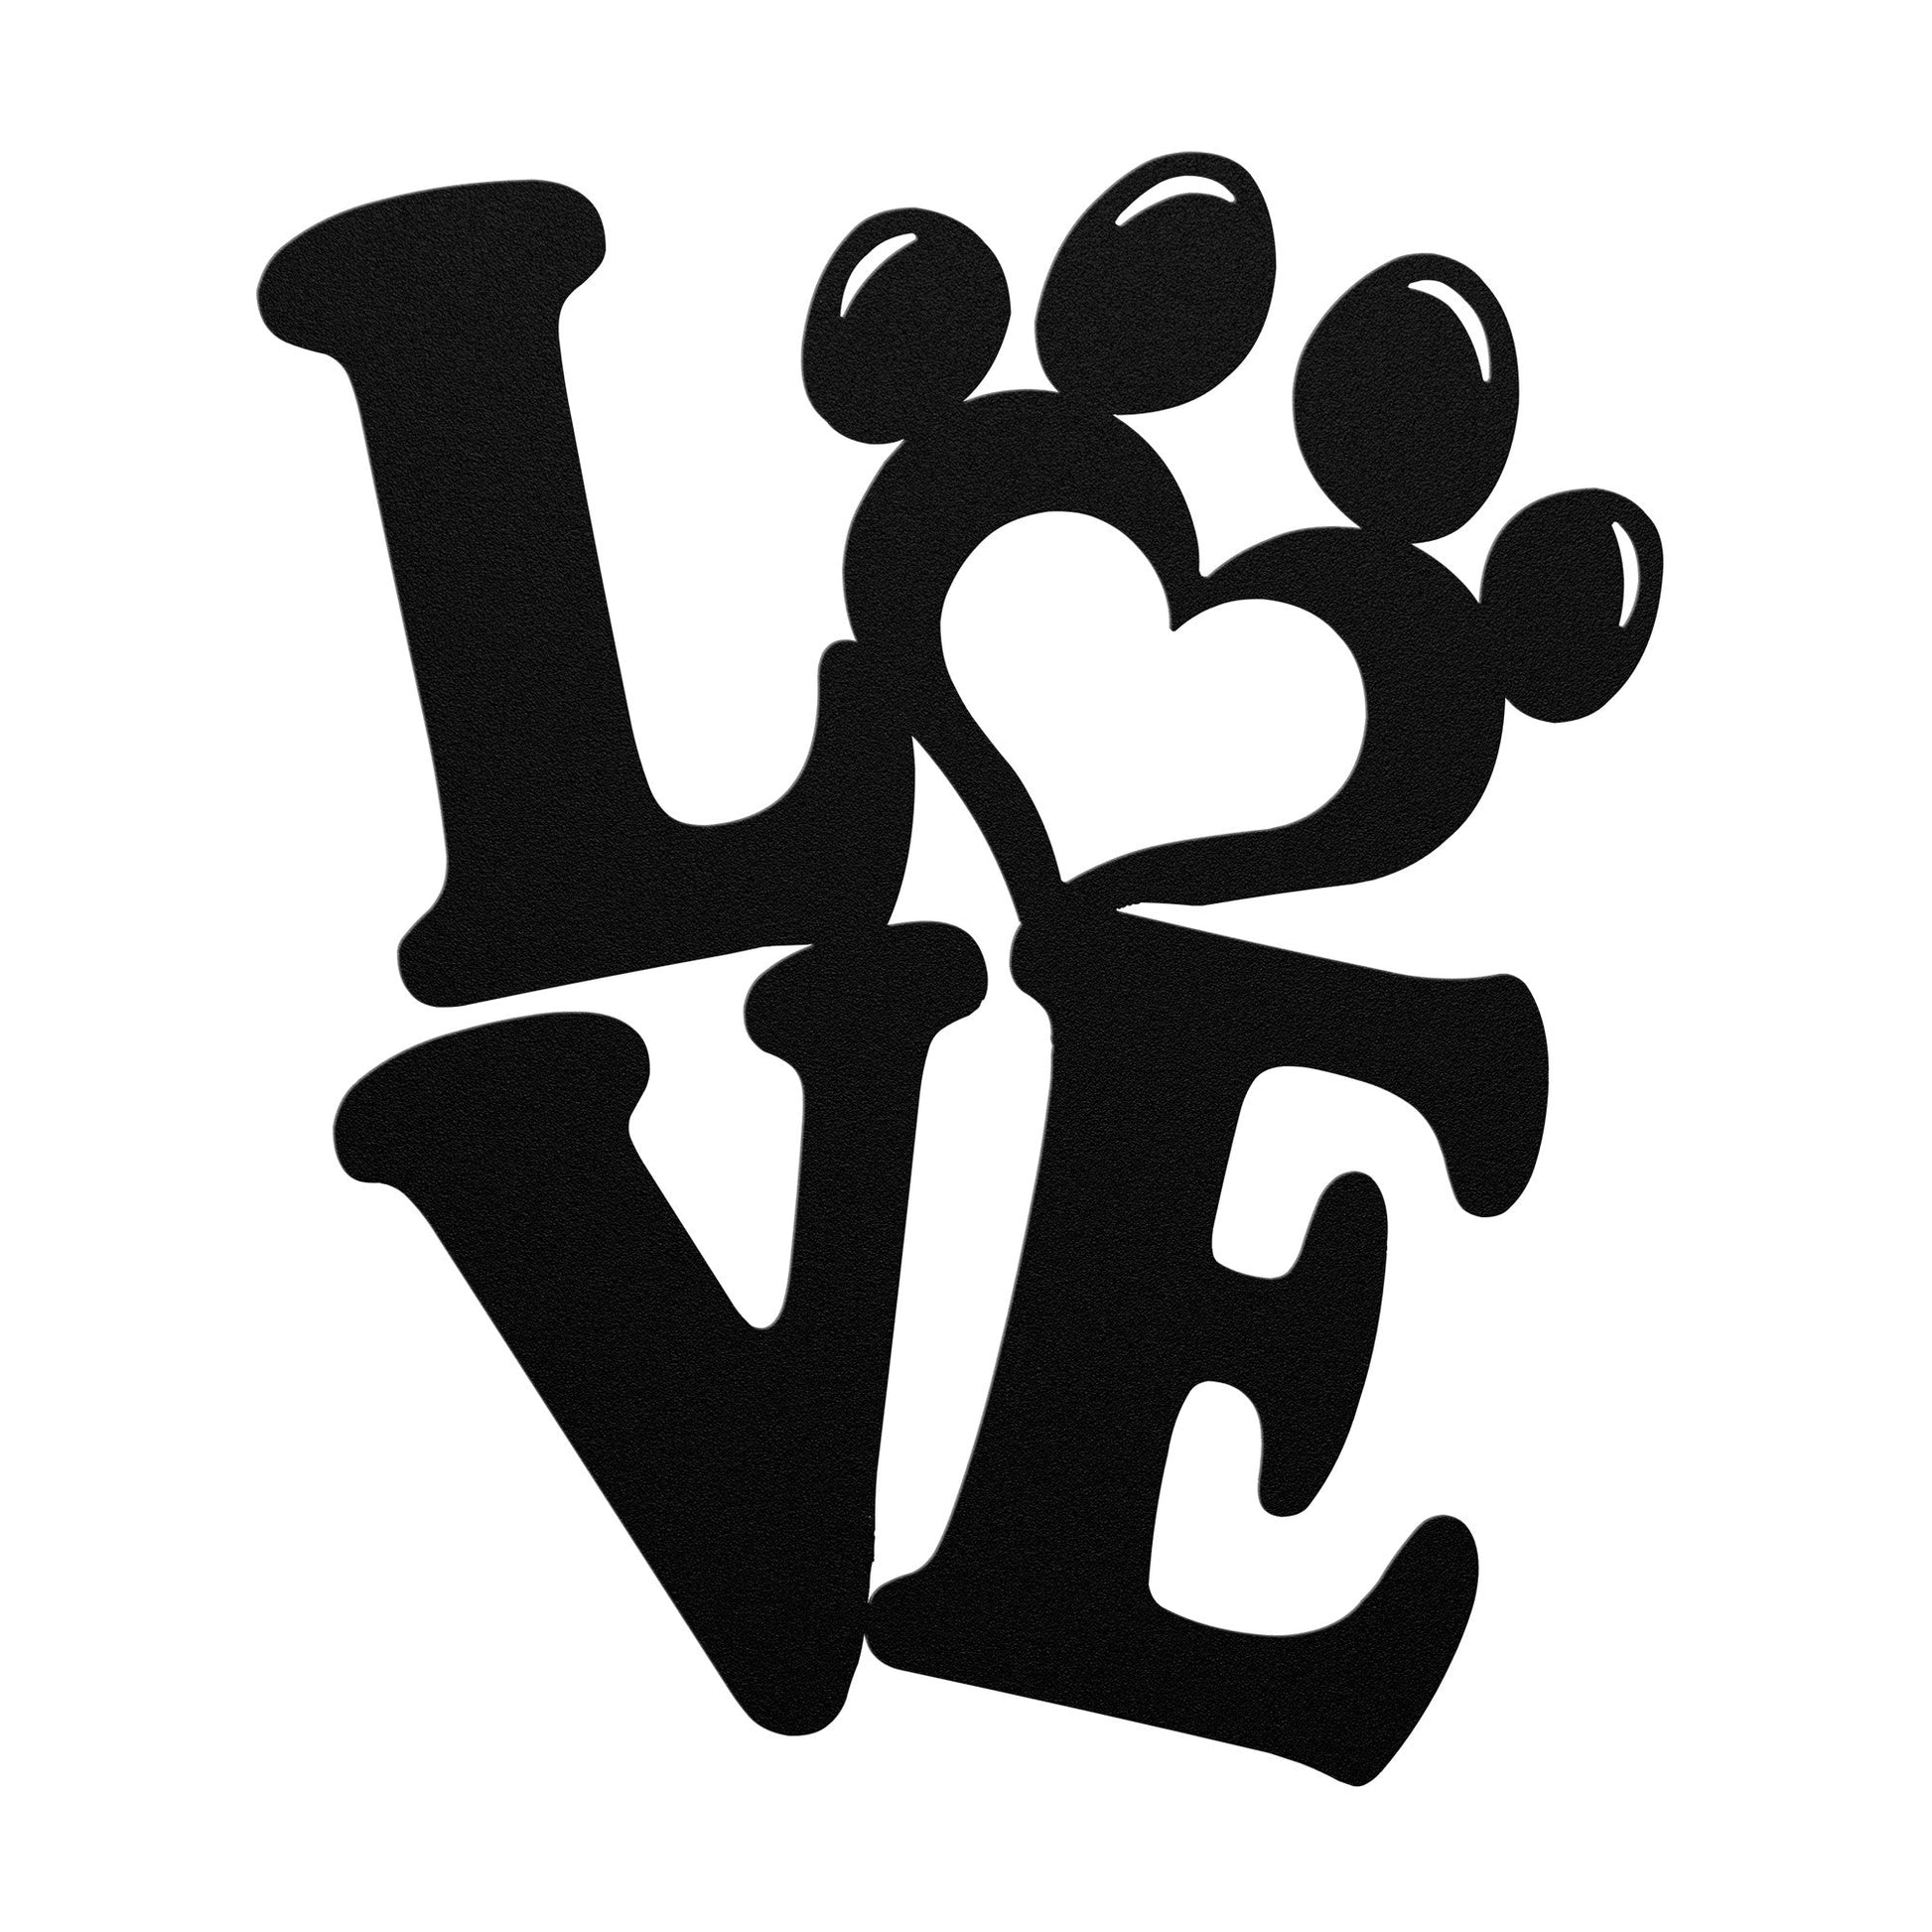 Love Dog Metal Wall Art - Dog Metal Signs - Dog Signs Decor - Gifts For Dog Lovers